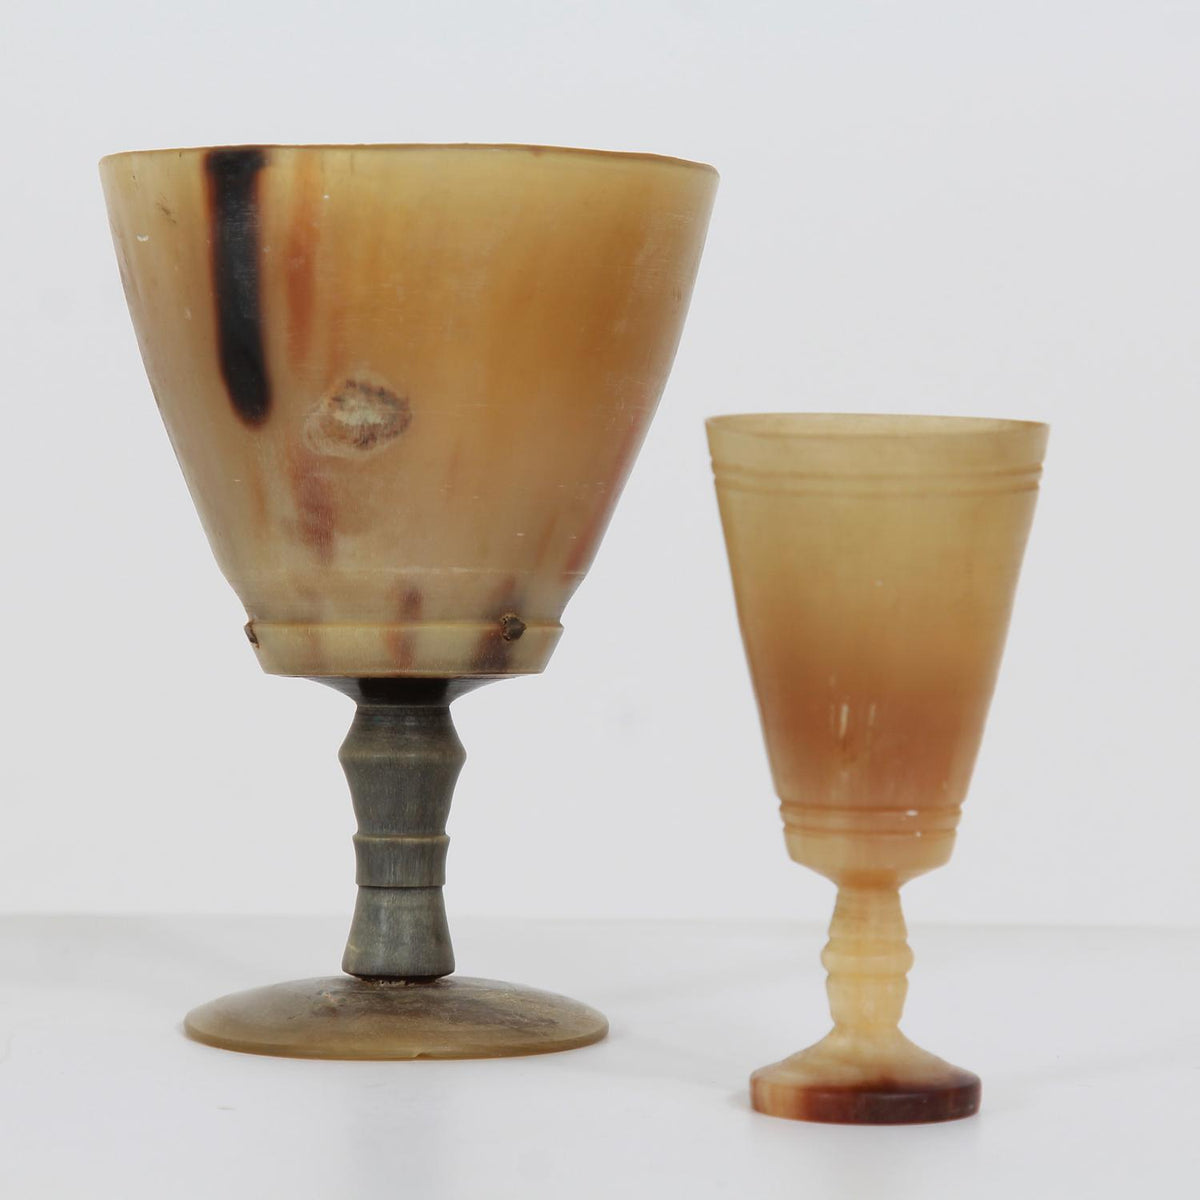 Collection of Two Swedish 19th Century Horn Drinking Vessels